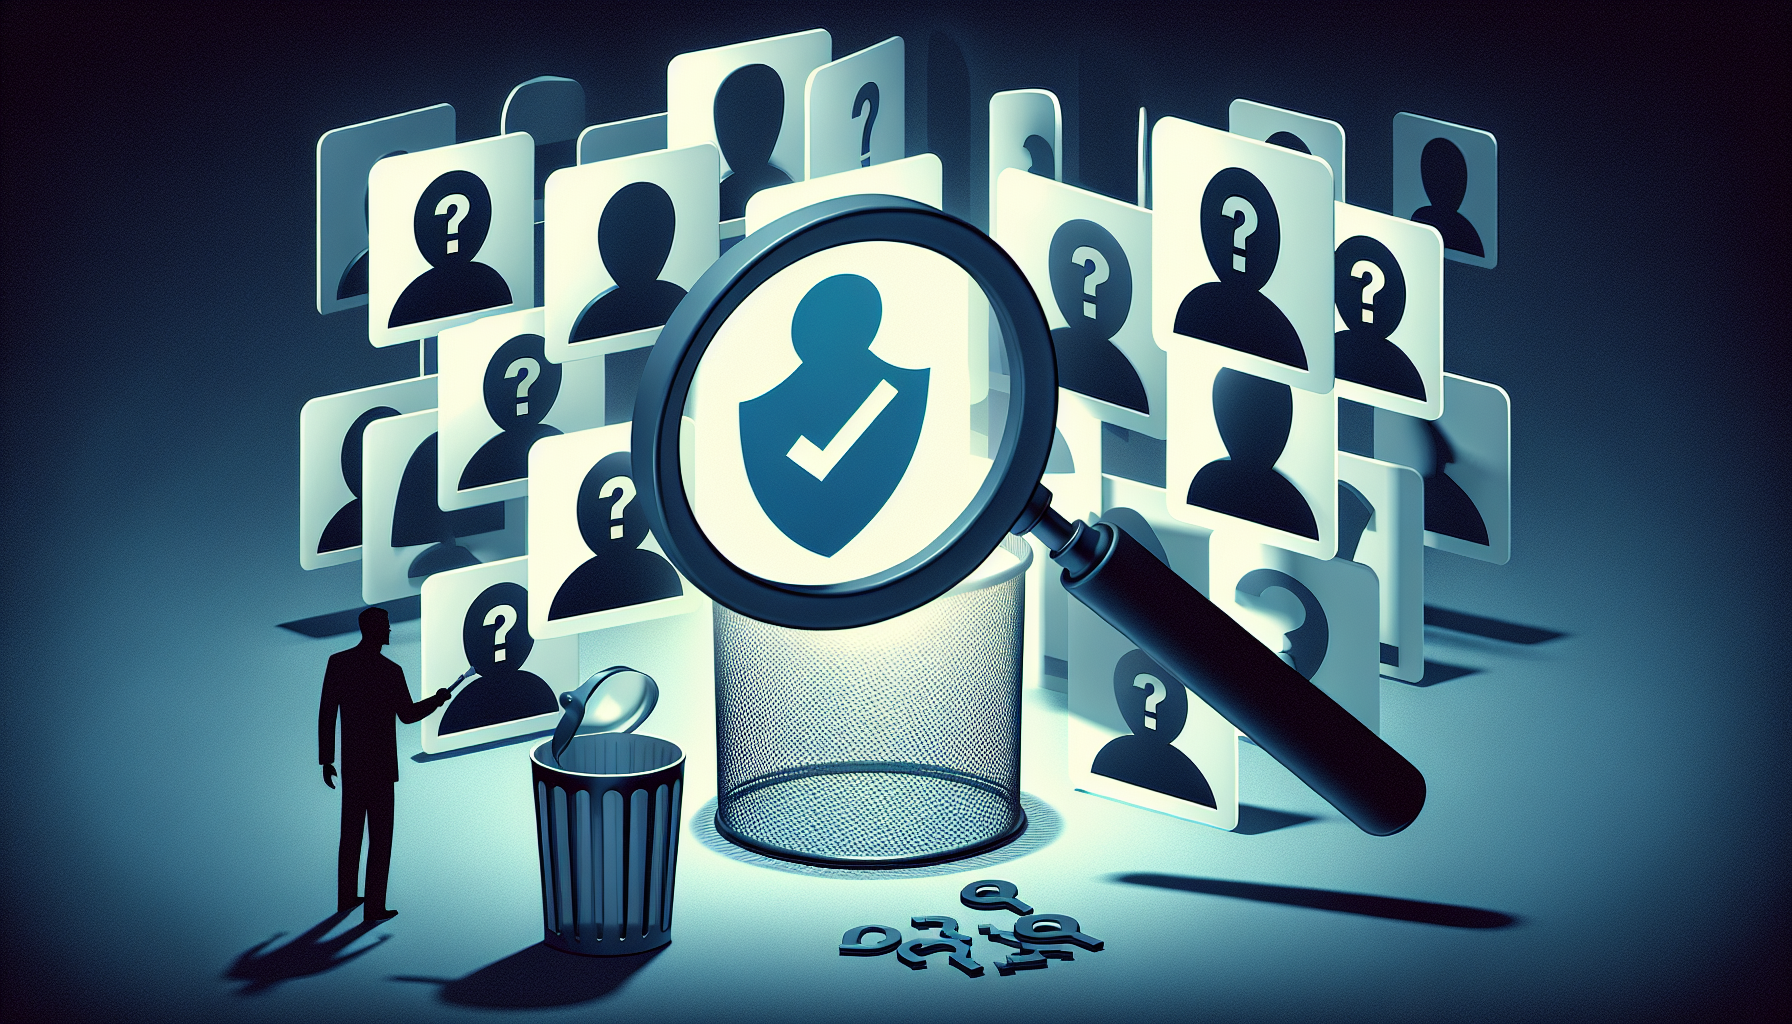 An illustration depicting fake profiles and scam prevention